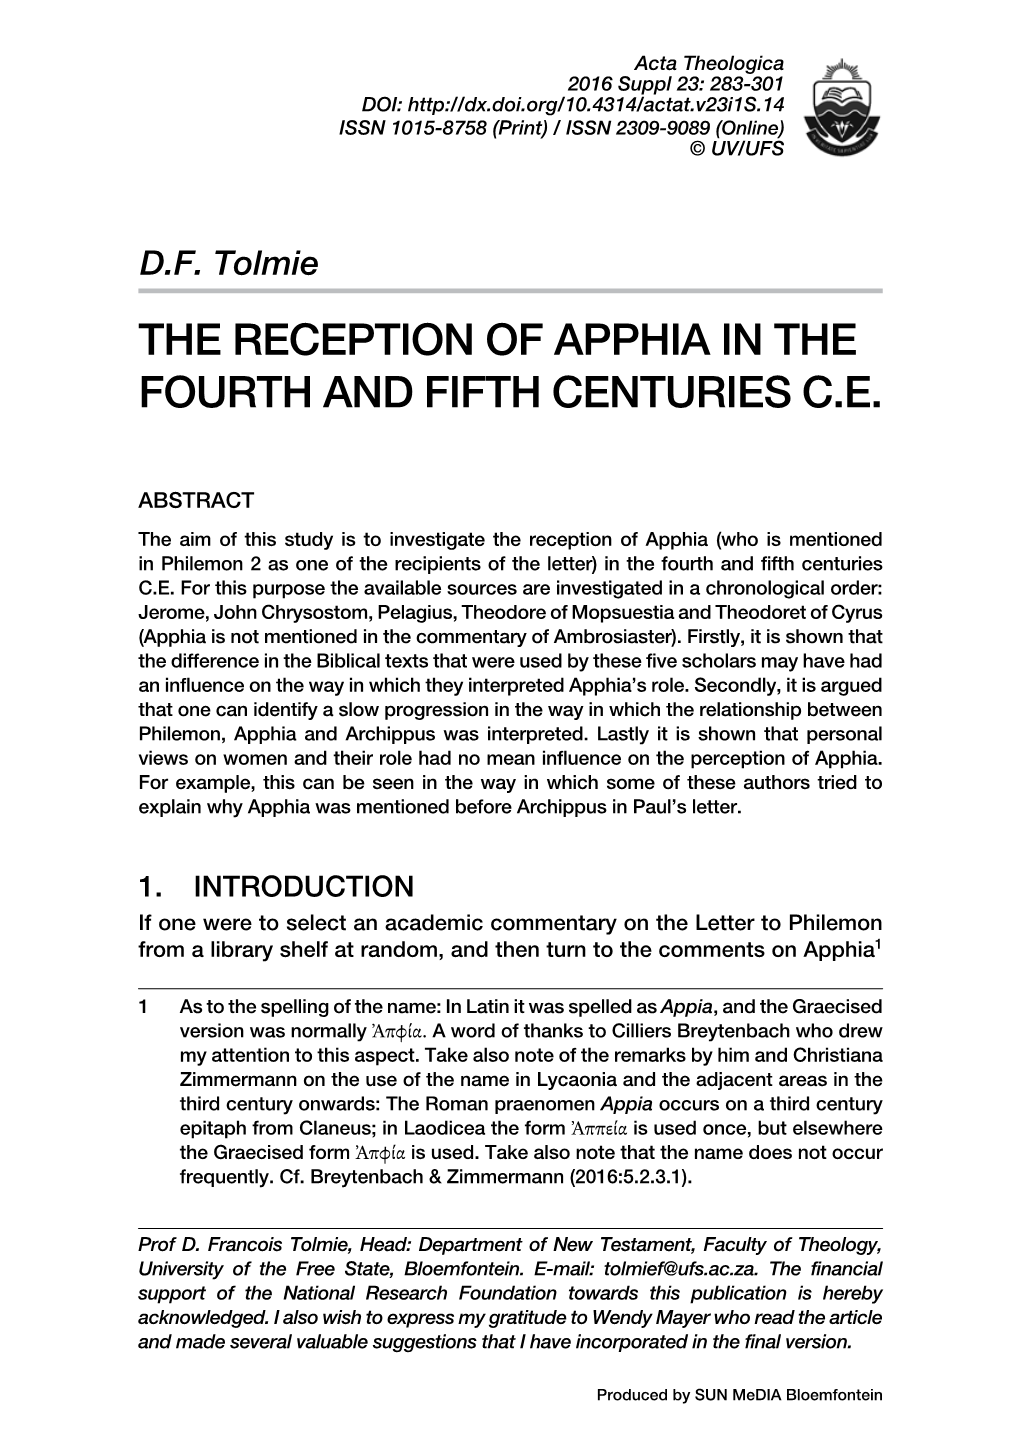 The Reception of Apphia in the Fourth and Fifth Centuries C.E